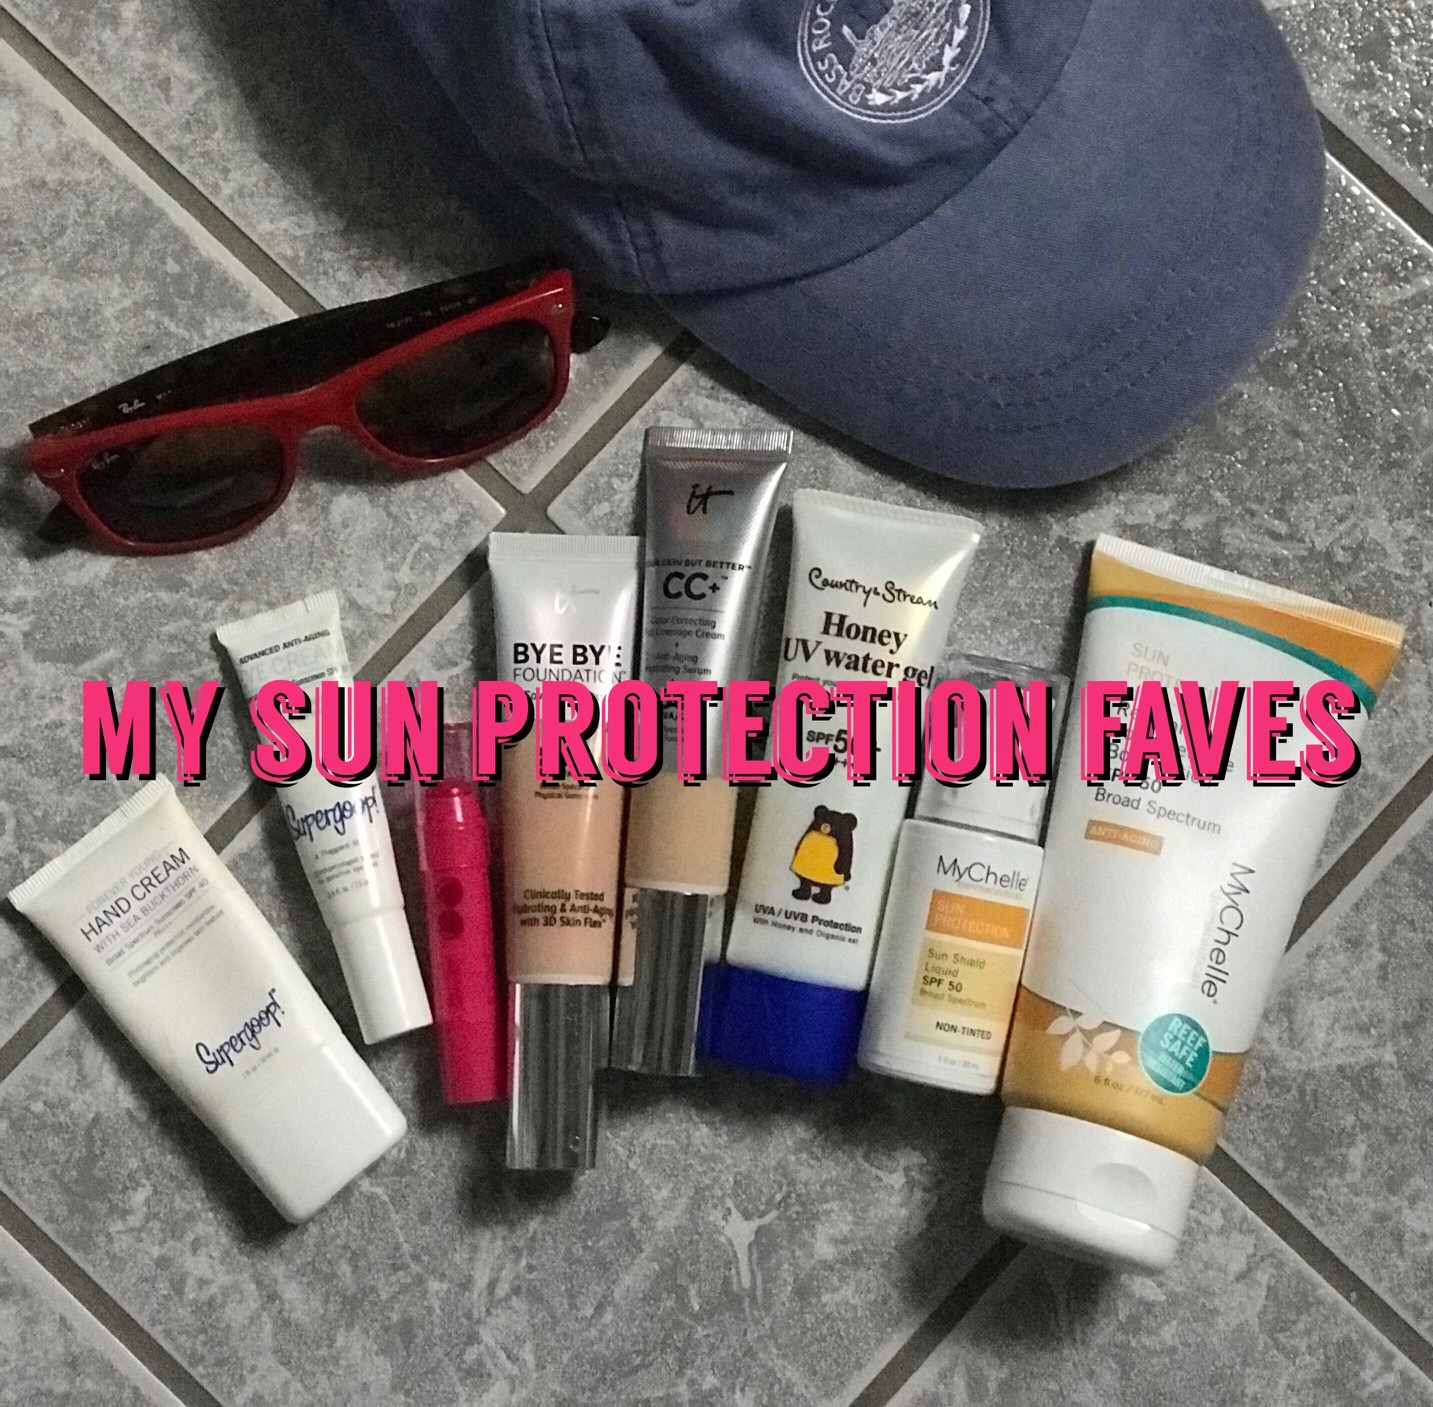 favorite sun protection products: sunscreens, makeup with sunscreen, apparel with SPF, neversaydiebeauty.com